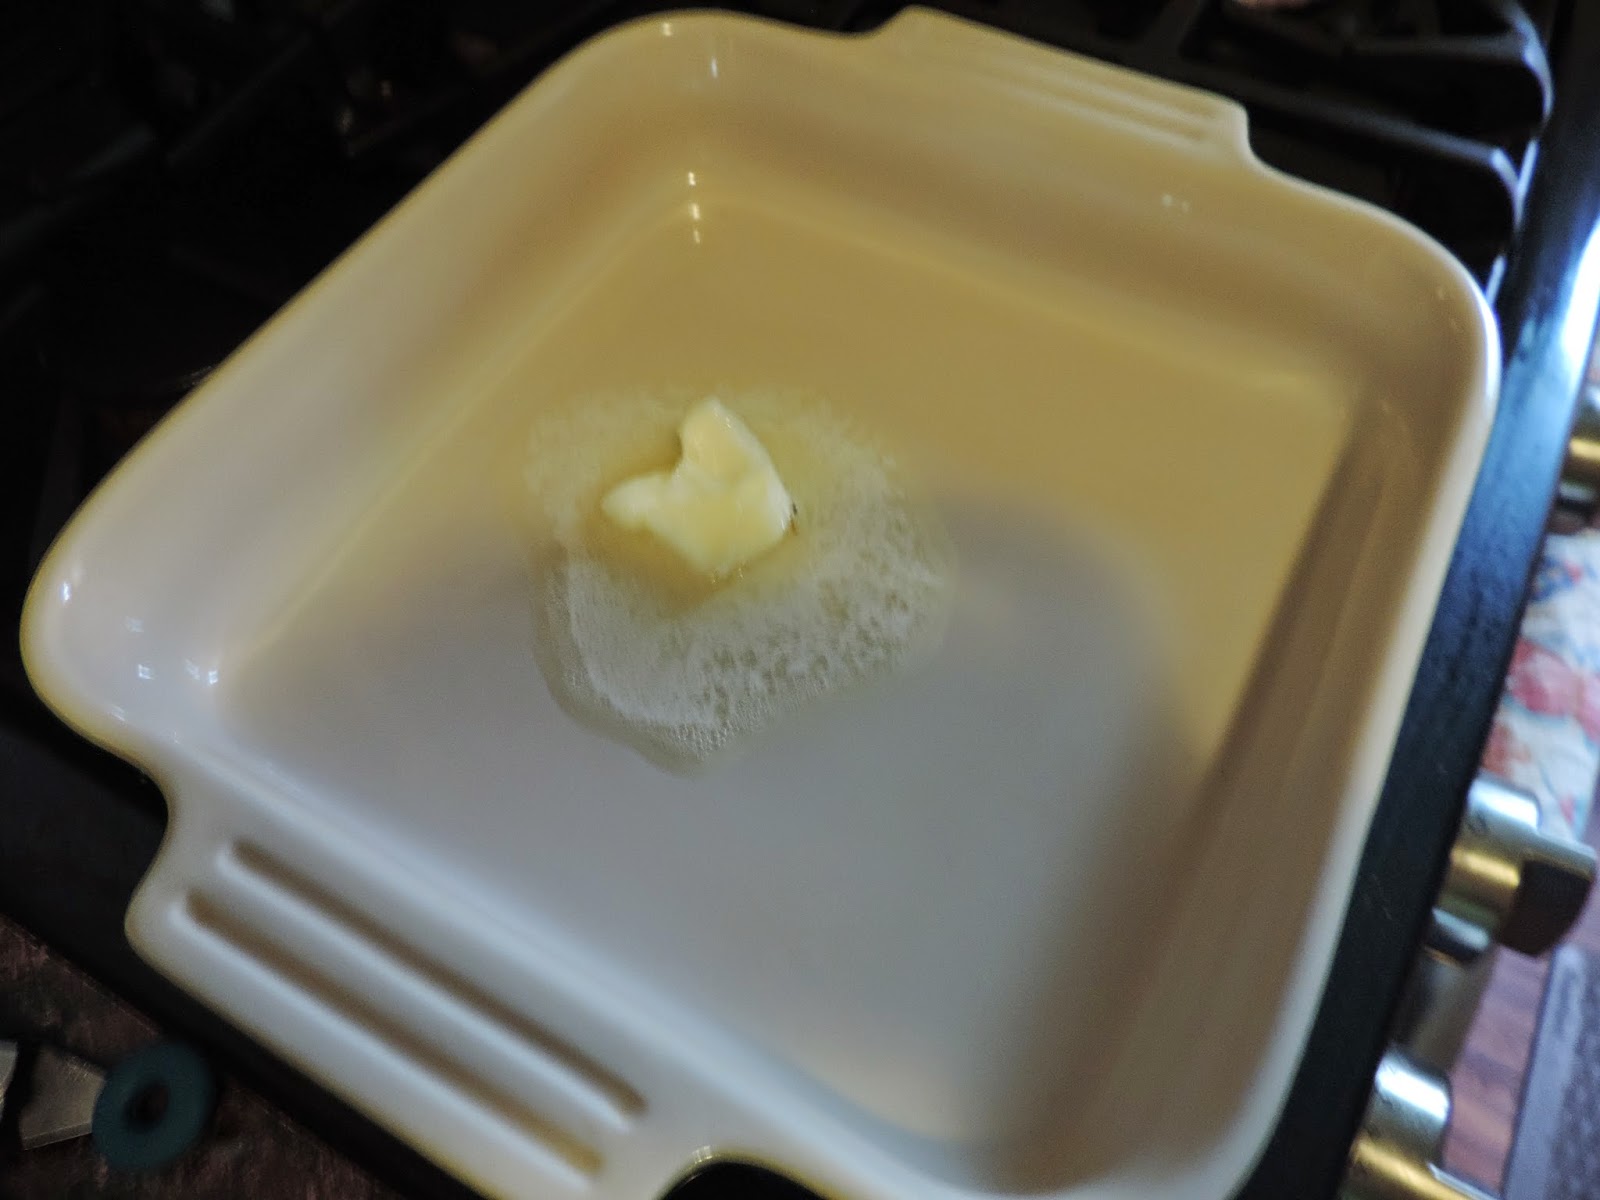 Butter melting in the baking dish.